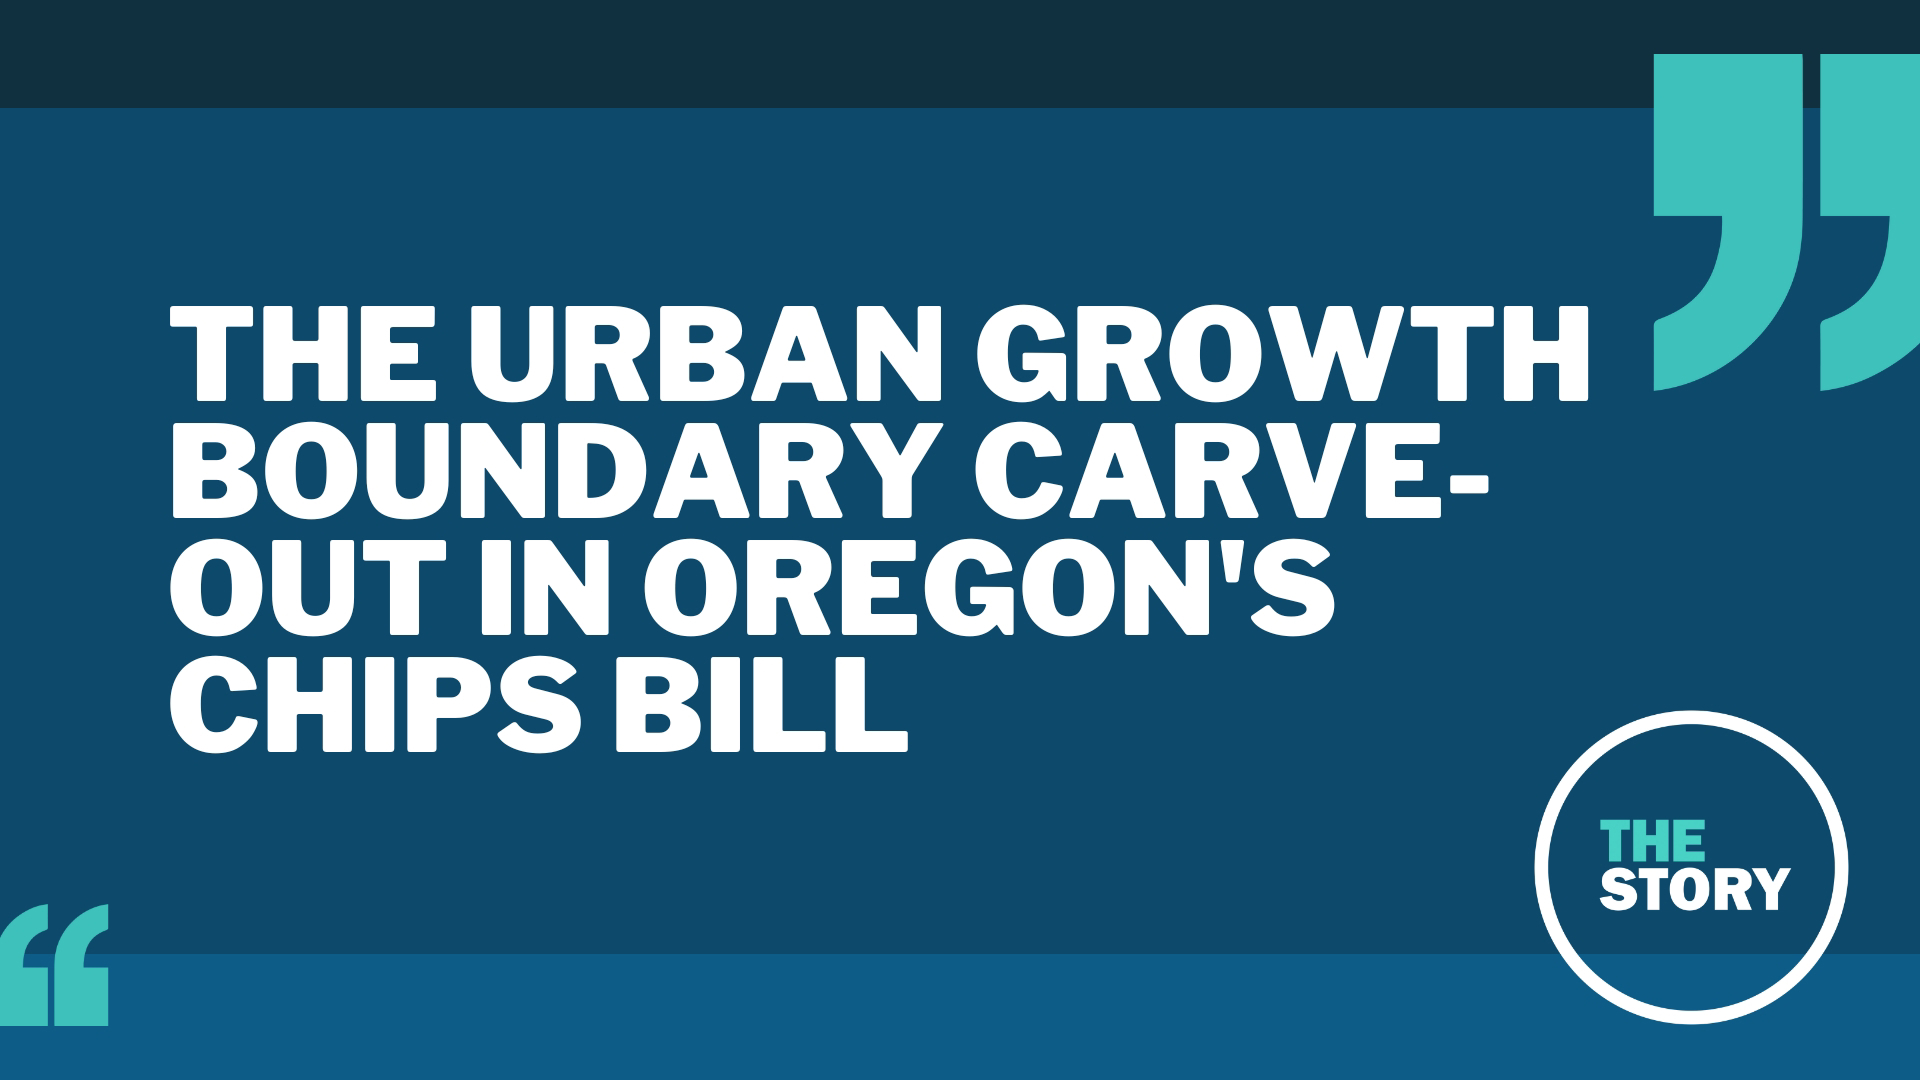 The most controversial part of the bill is a carve-out for Gov. Tina Kotek to make some limited changes to the urban growth boundary for chip makers.